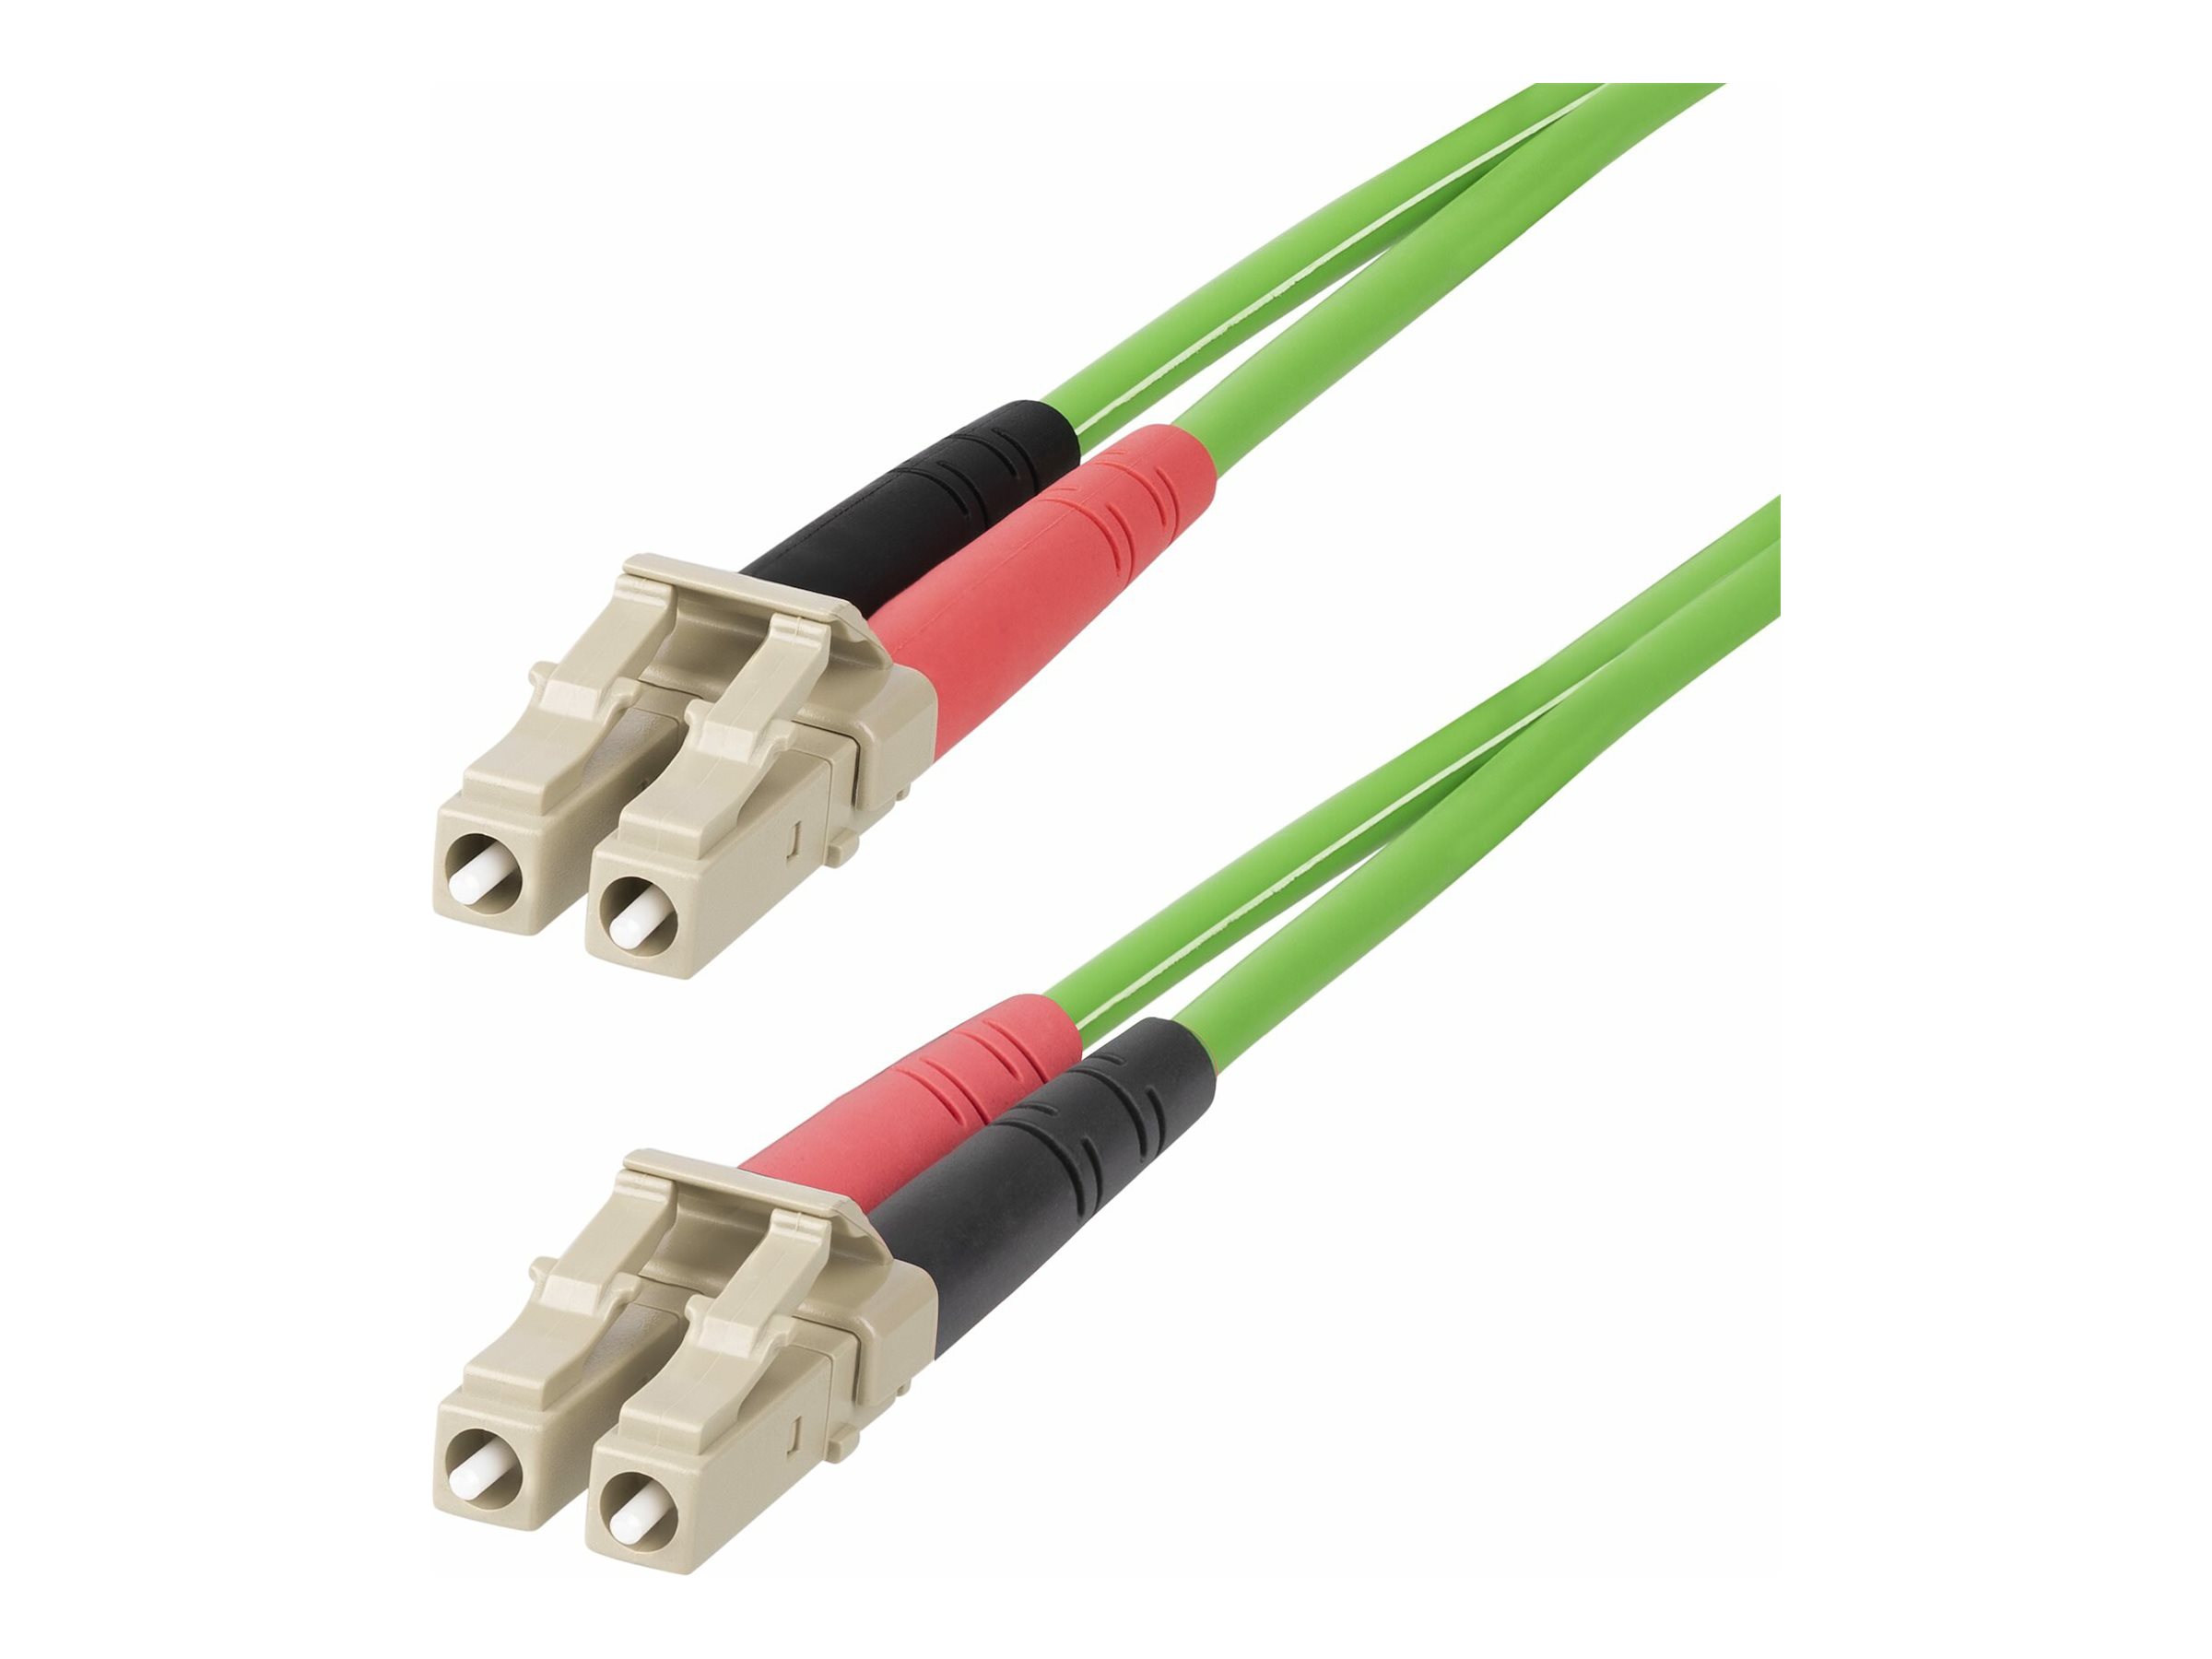 StarTech.com 10m (30ft) LC to LC (UPC) OM5 Multimode Fiber Optic Cable, 50/125m Duplex LOMMF Zipcord, VCSEL, 40G/100G, Bend Ins